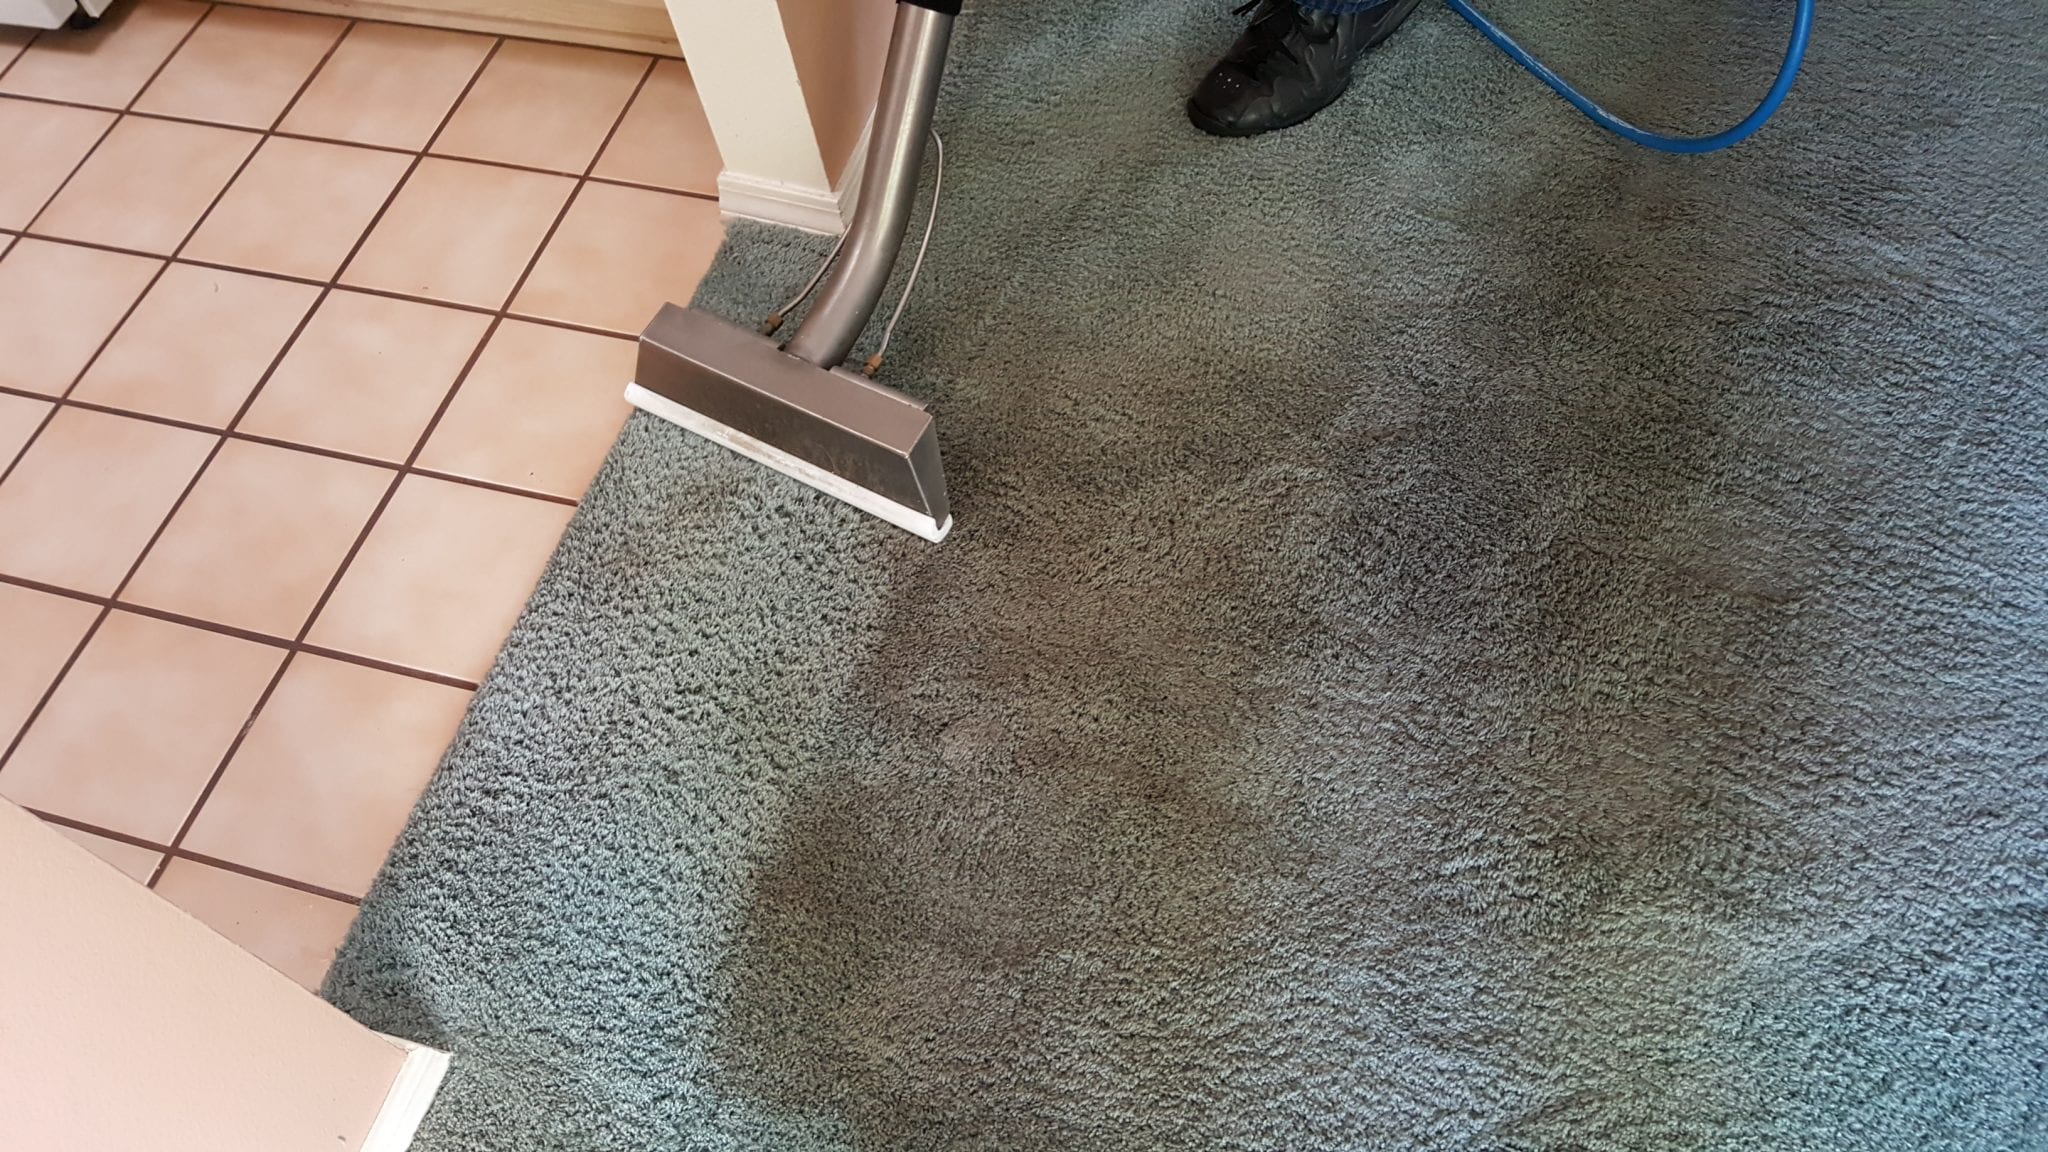 Albuquerque Hot Water Extraction Cleaning New Mexico Carpet Repair